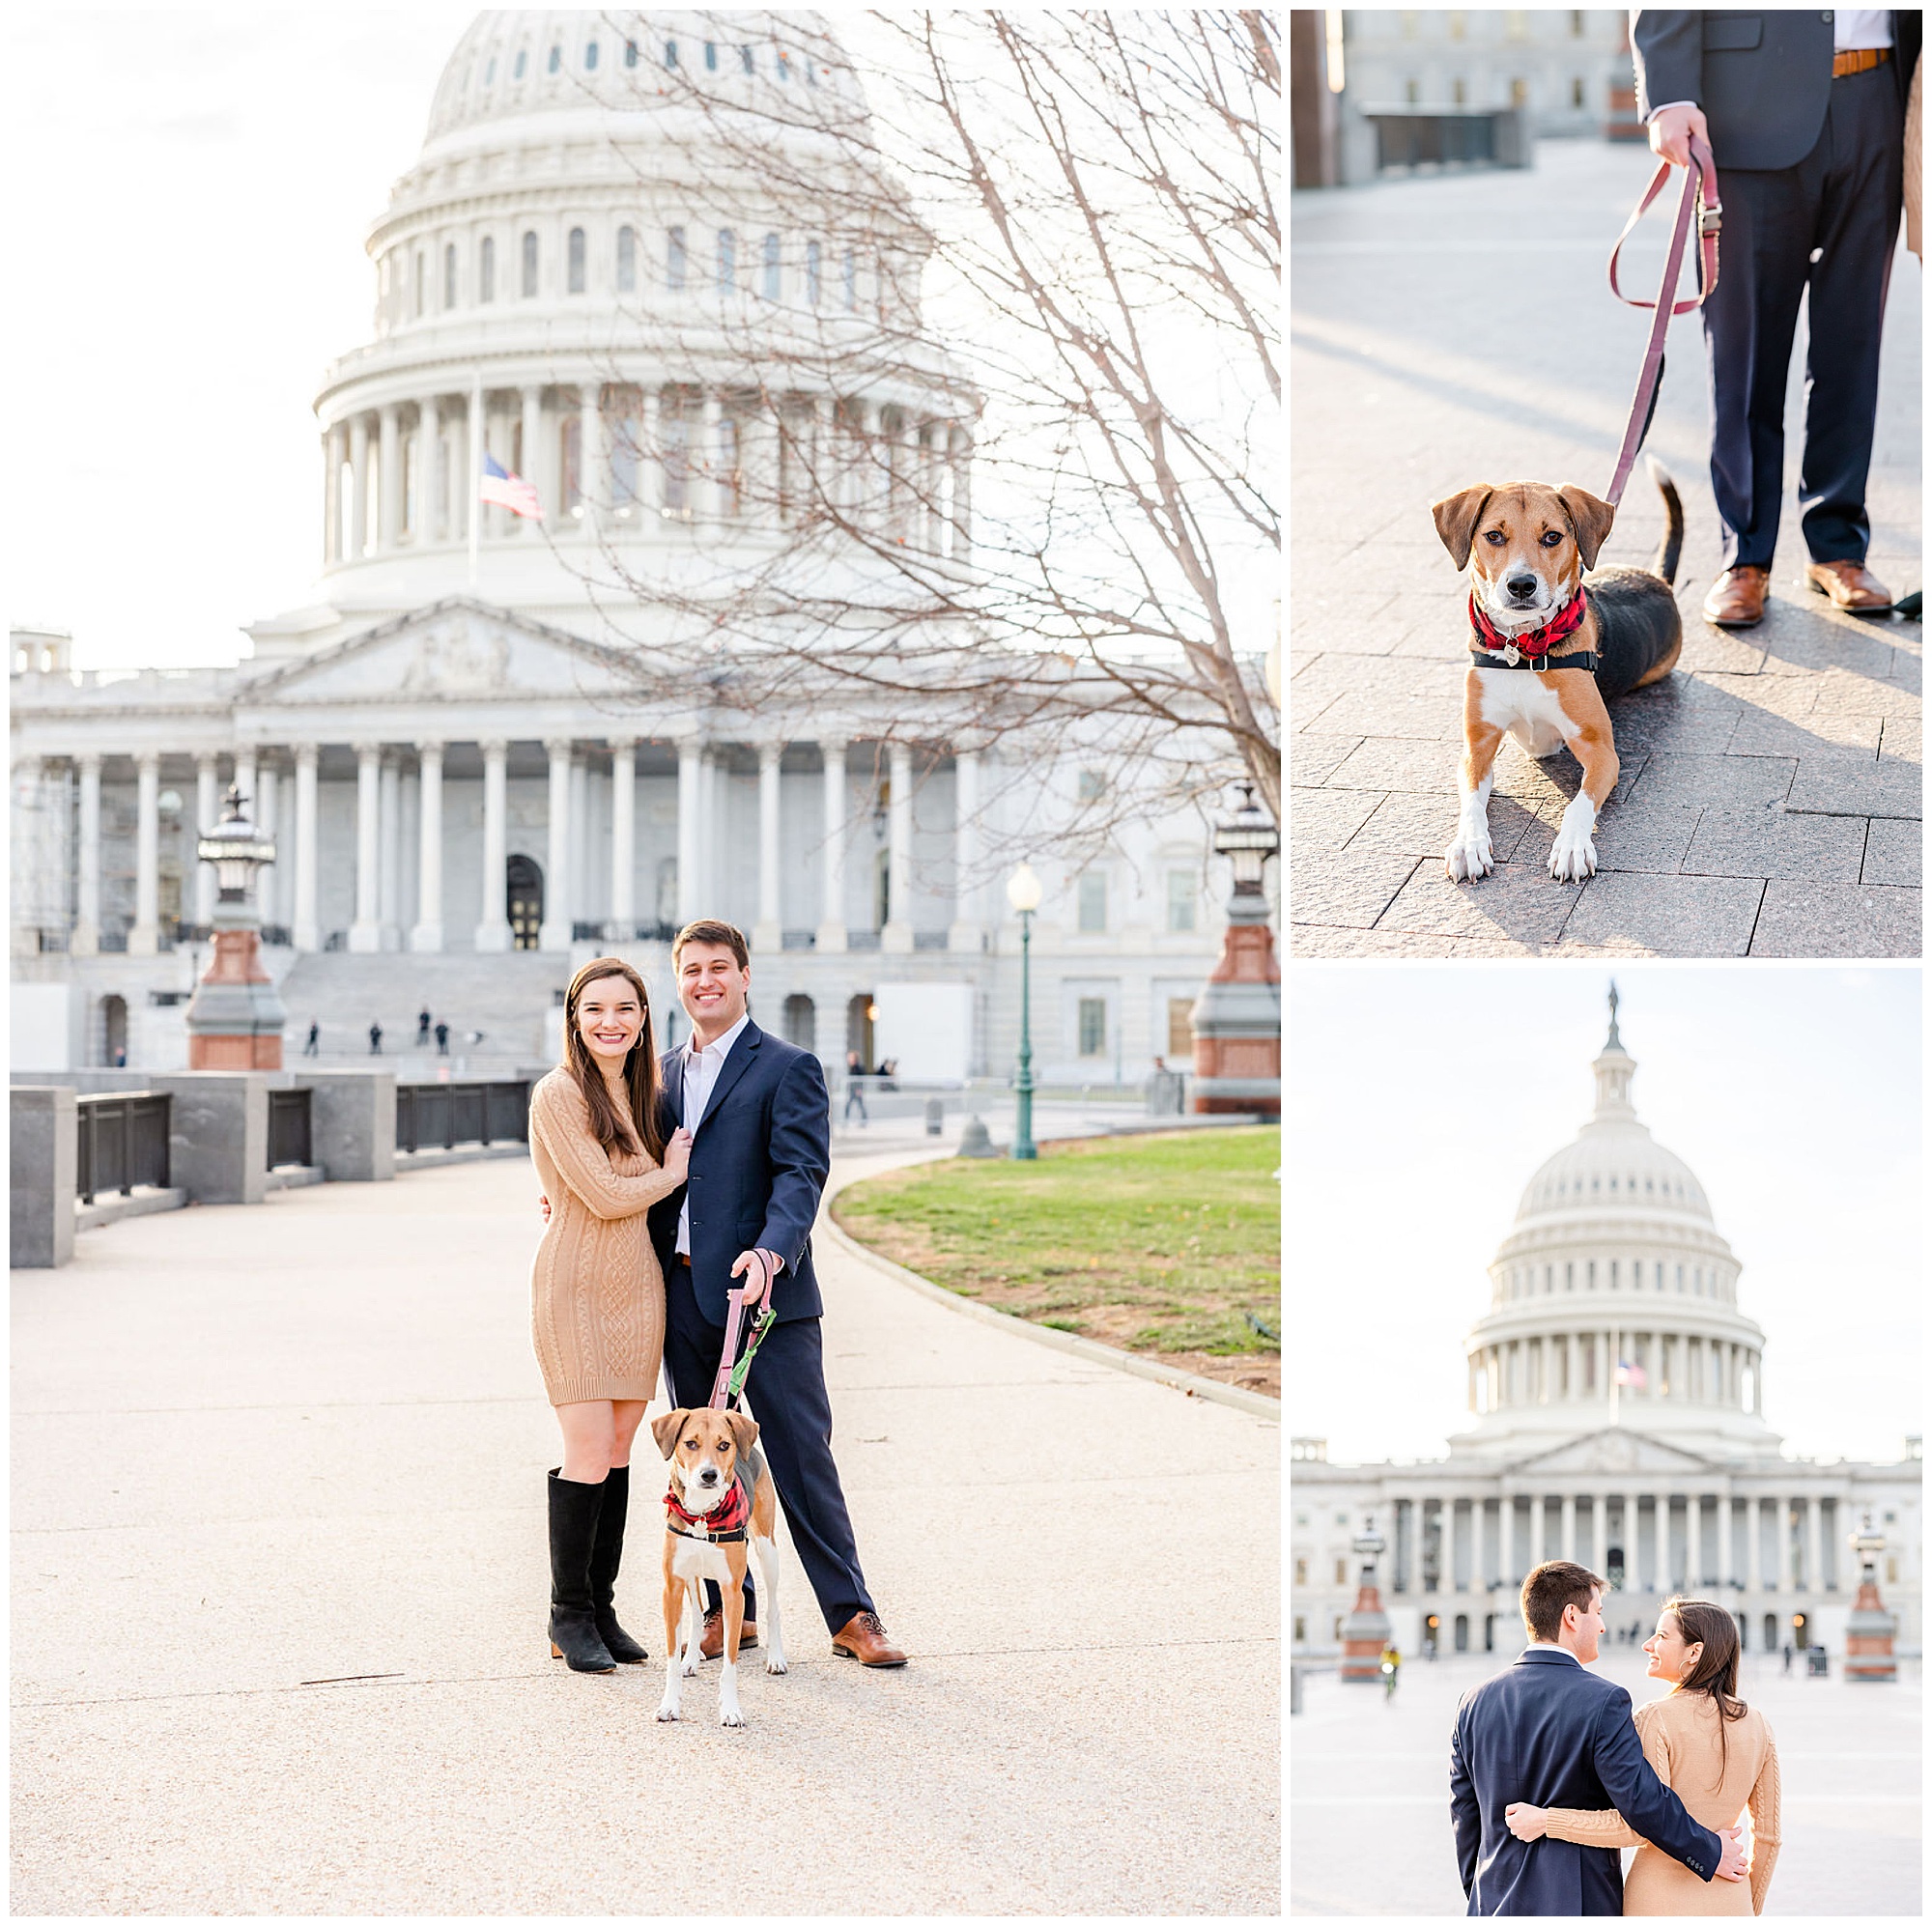 autumn Capitol Hill engagement session, Capitol Hill engagement photos, Capitol Hill photographer, DC engagement photography, DC engagement photographer, DC wedding photography, autumn engagement photos, casual engagement photos, Rachel E.H. Photography, couple smiling with dog, dog laying on stone path, couple with arms around each other, couple with backs to the camera